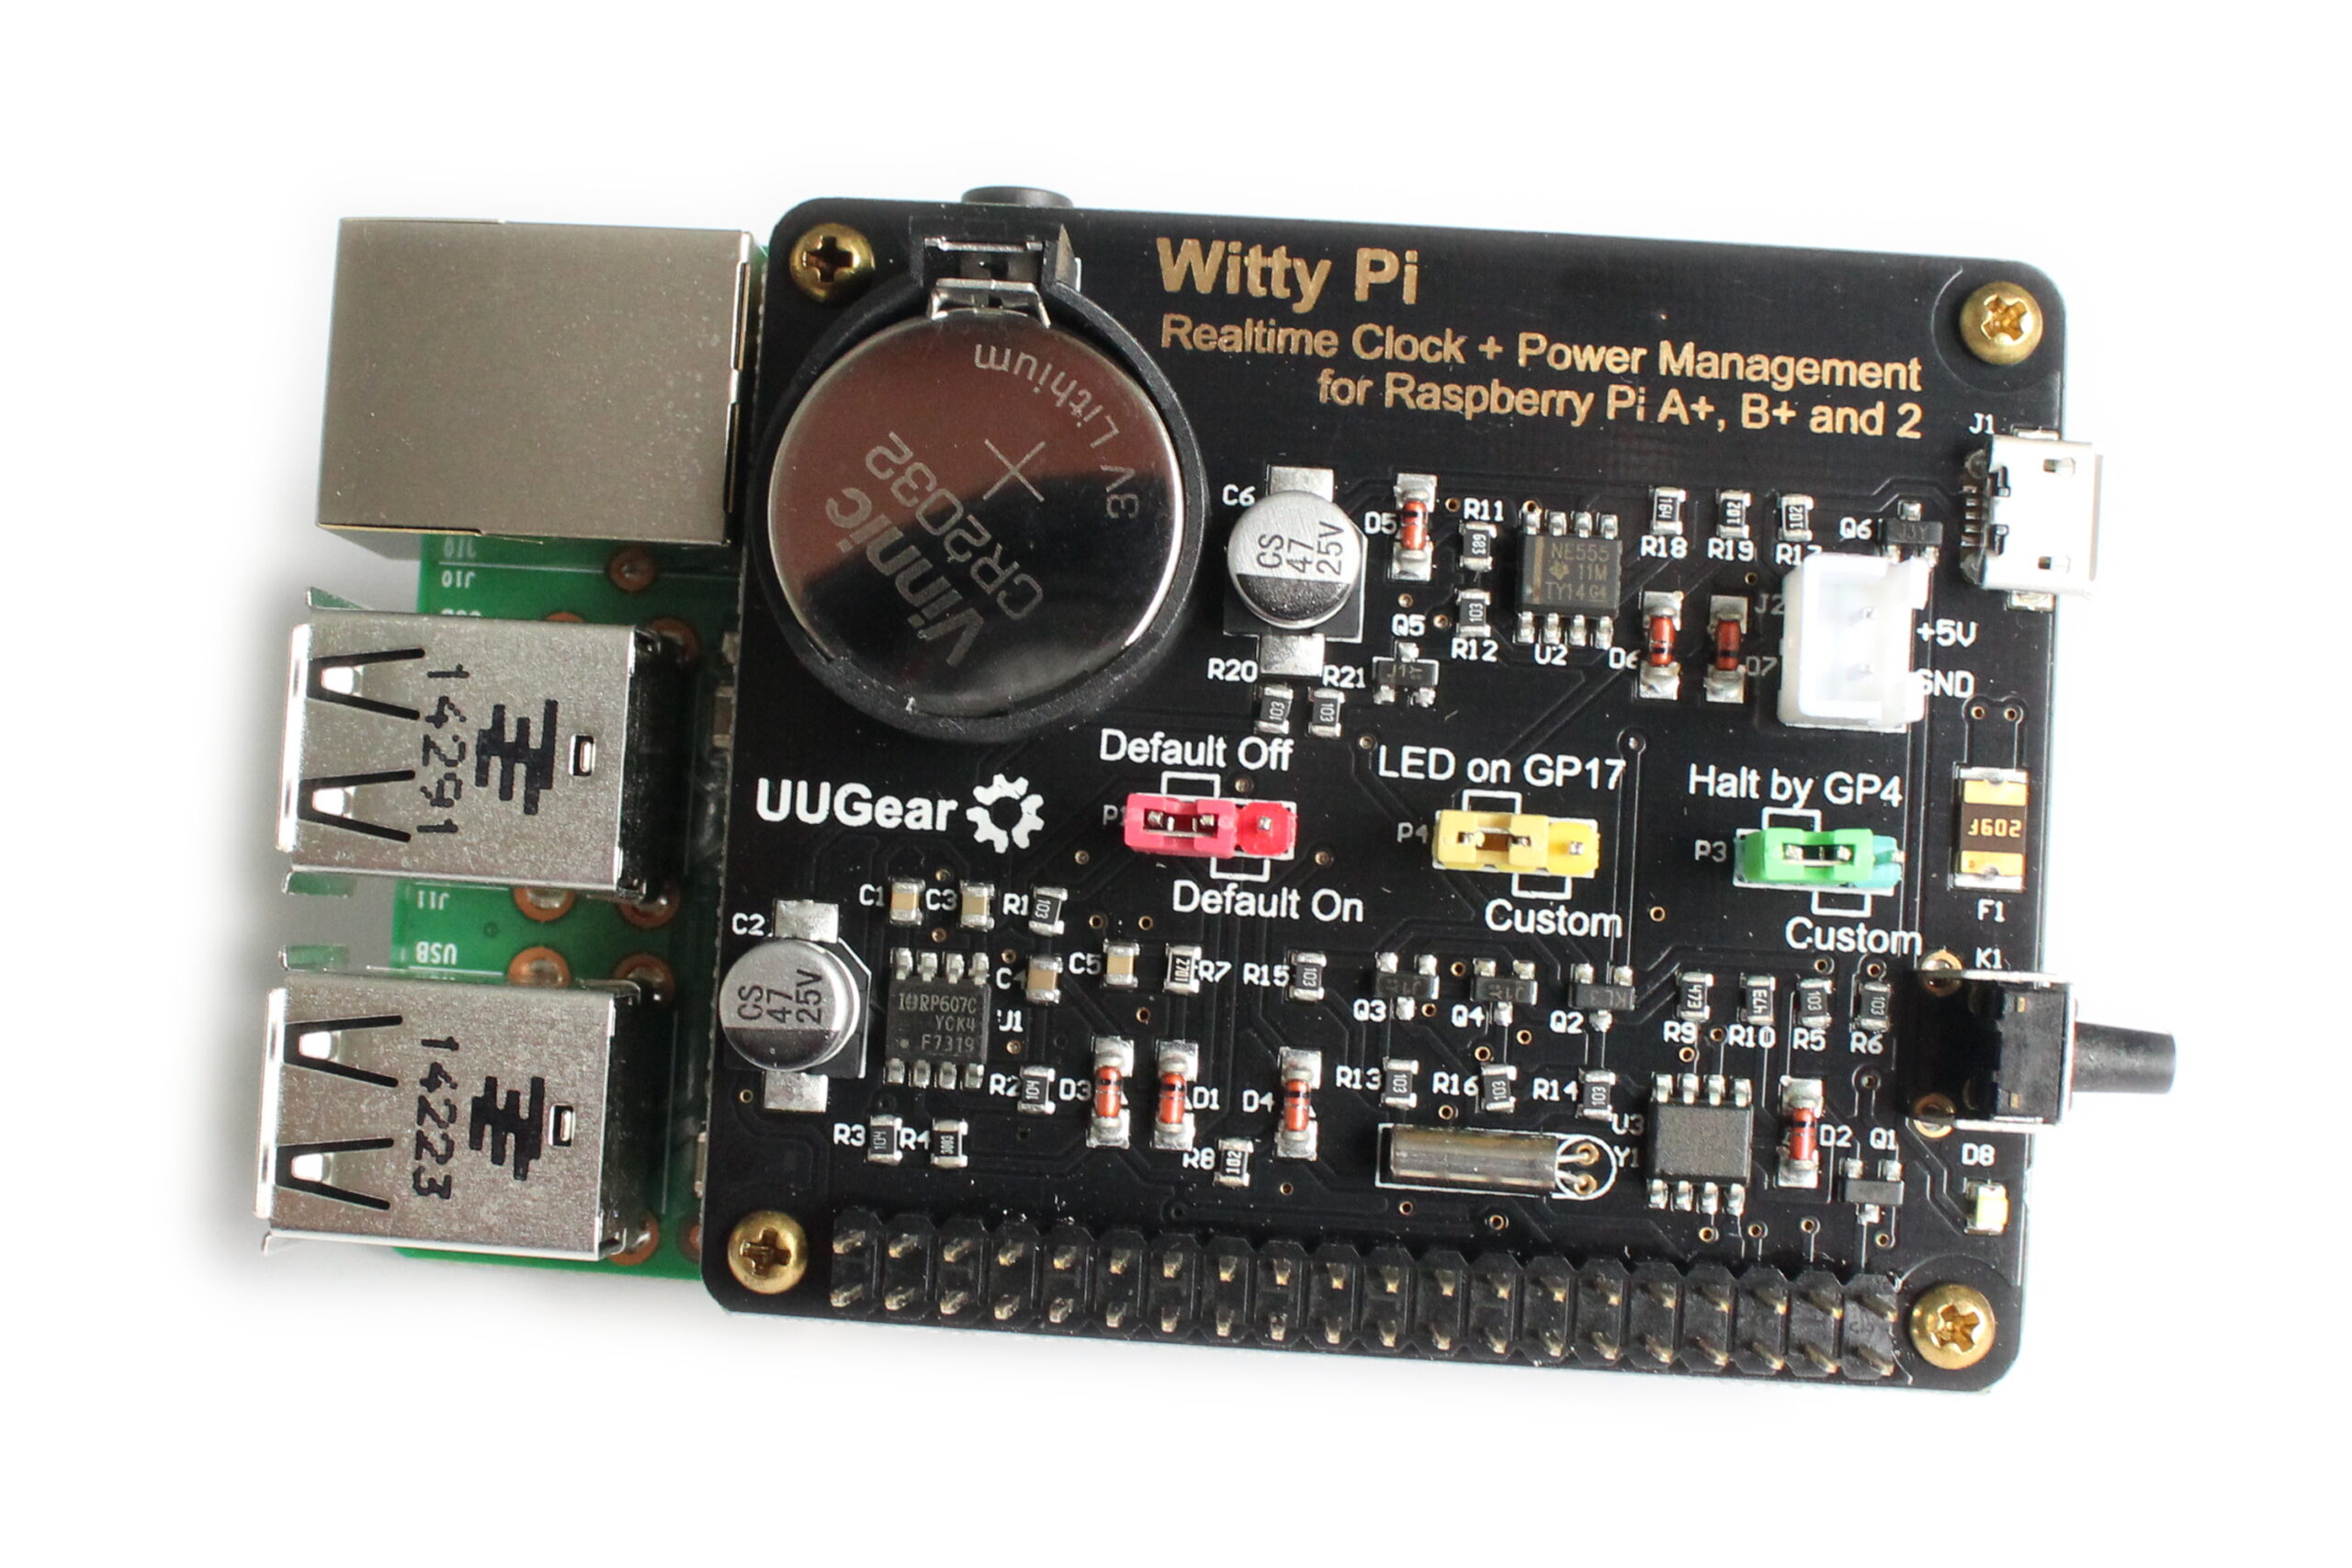 Witty Pi 3 RTC & Power Management for Raspberry Pi Boards 